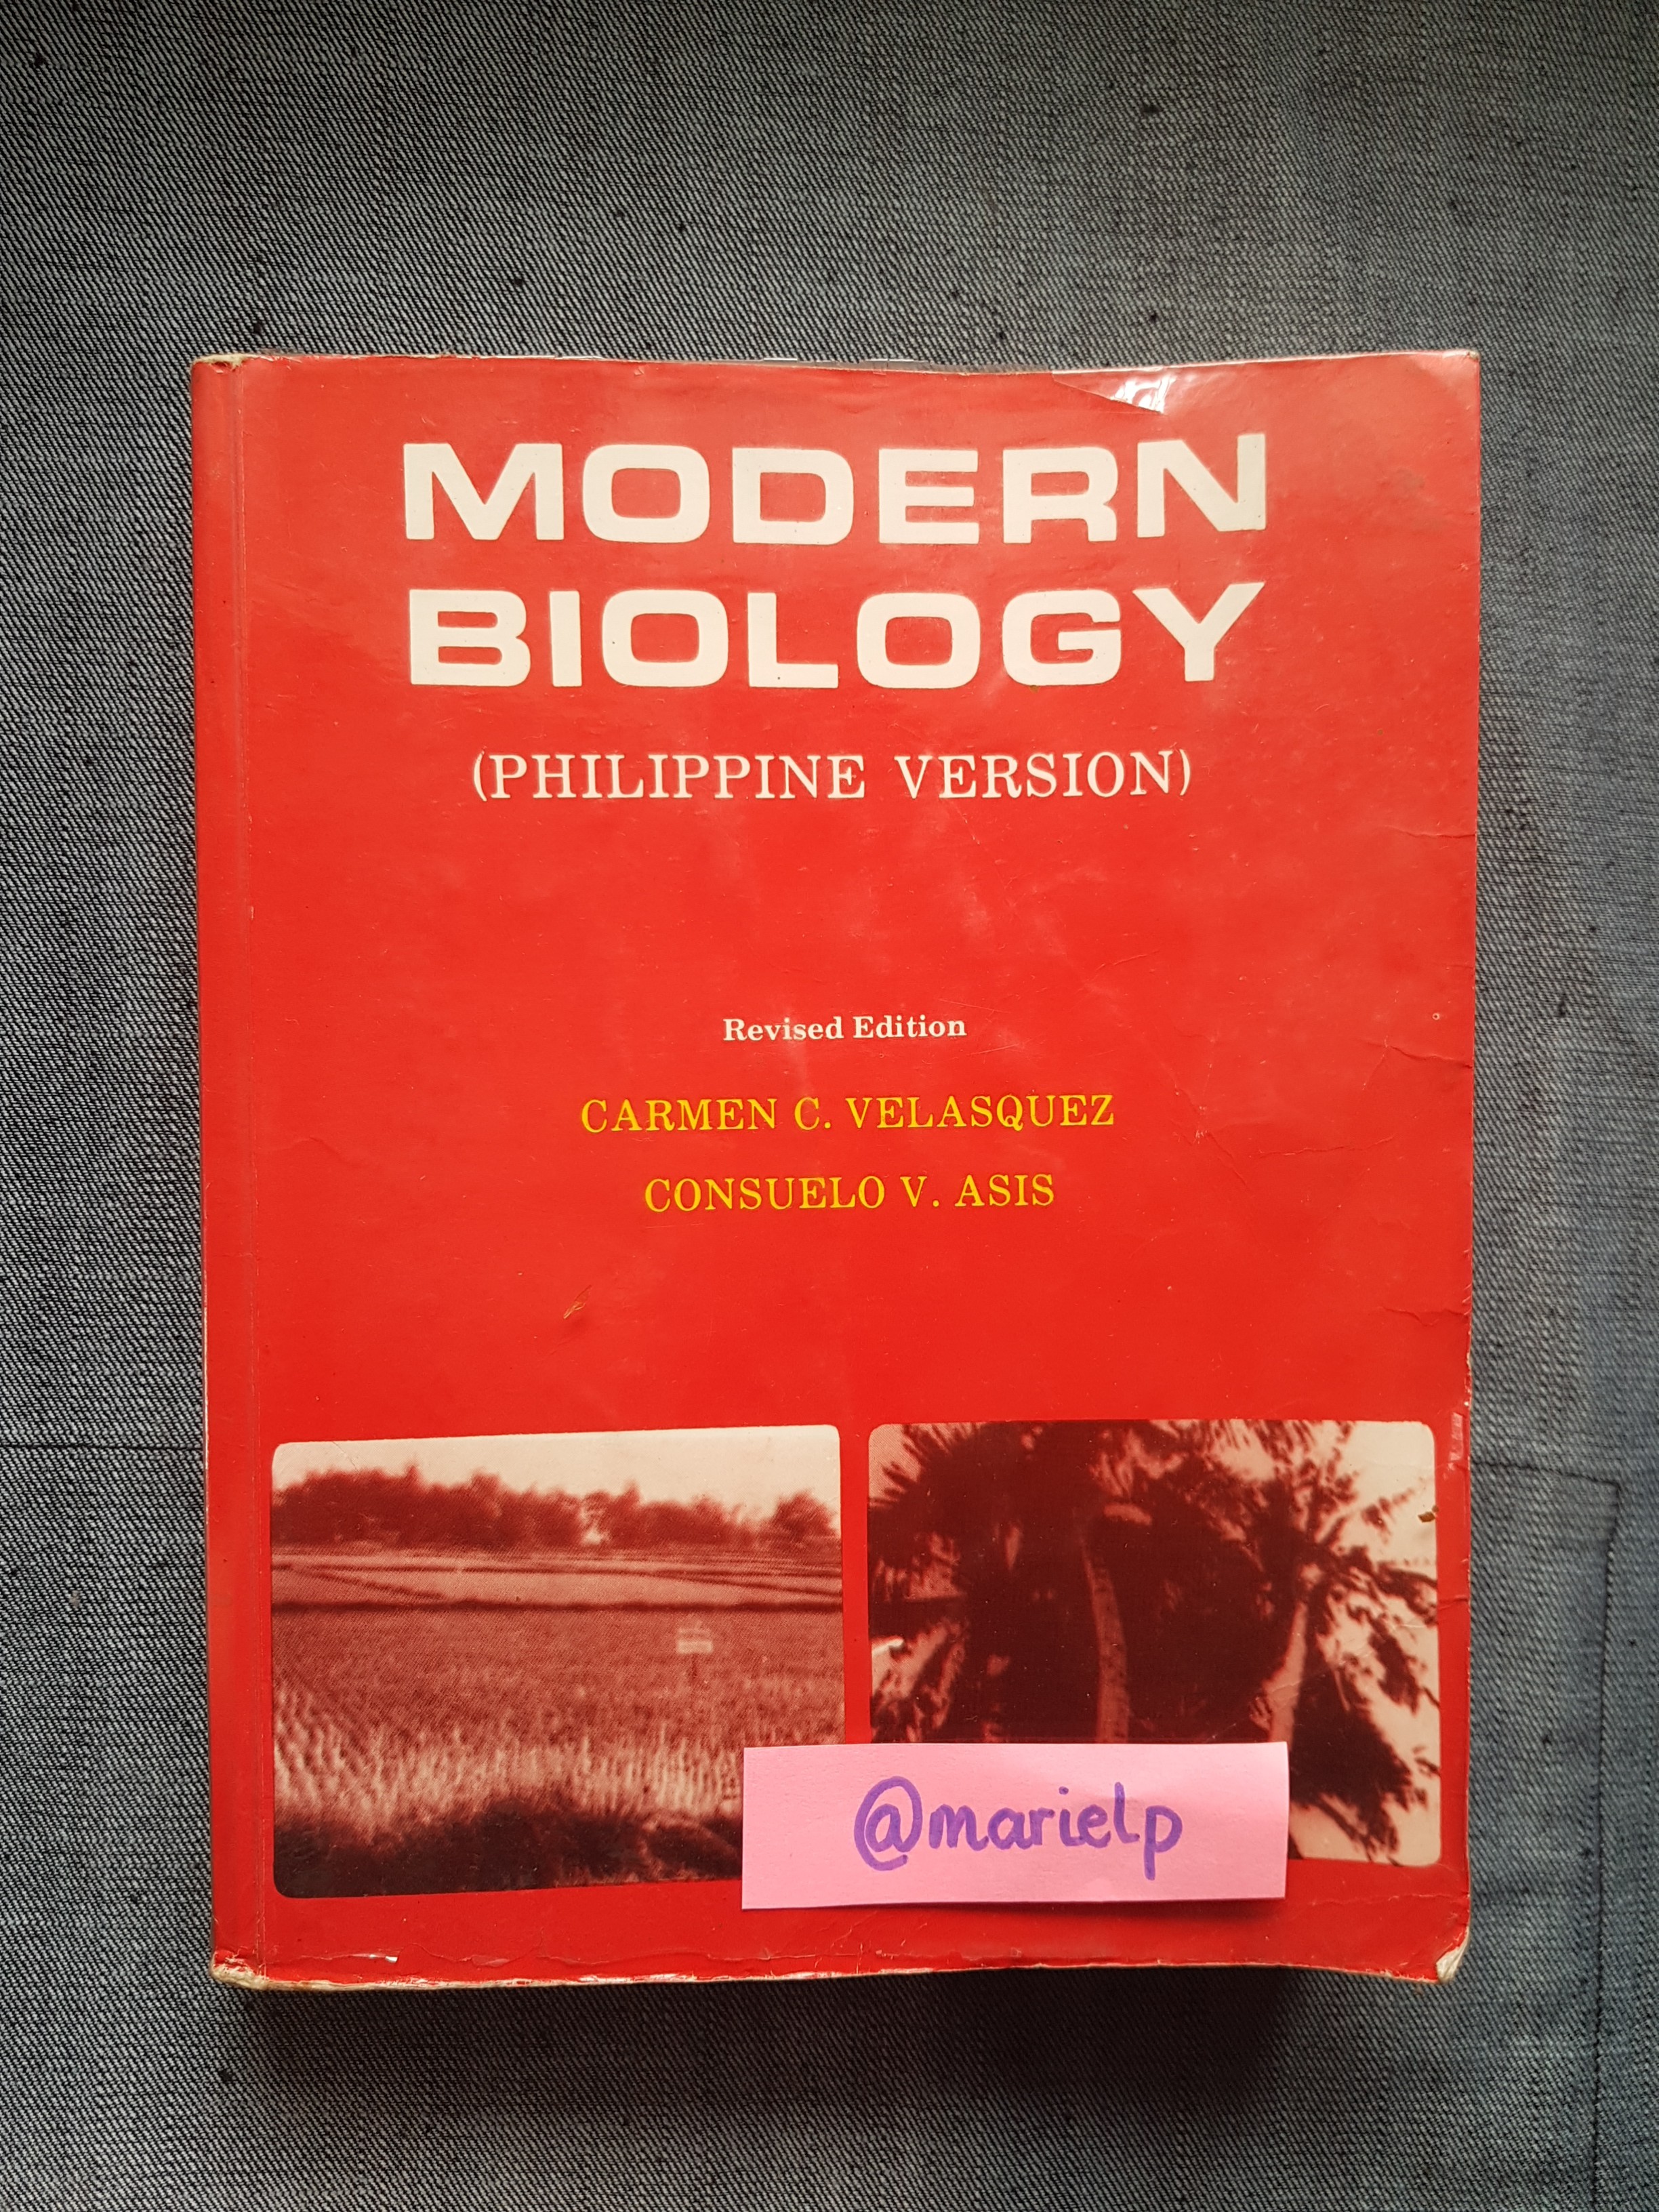 Biology　Edition),　Toys,　Magazines,　(Philippine　Textbooks　Hobbies　Carousell　Books　on　Textbook:　Modern